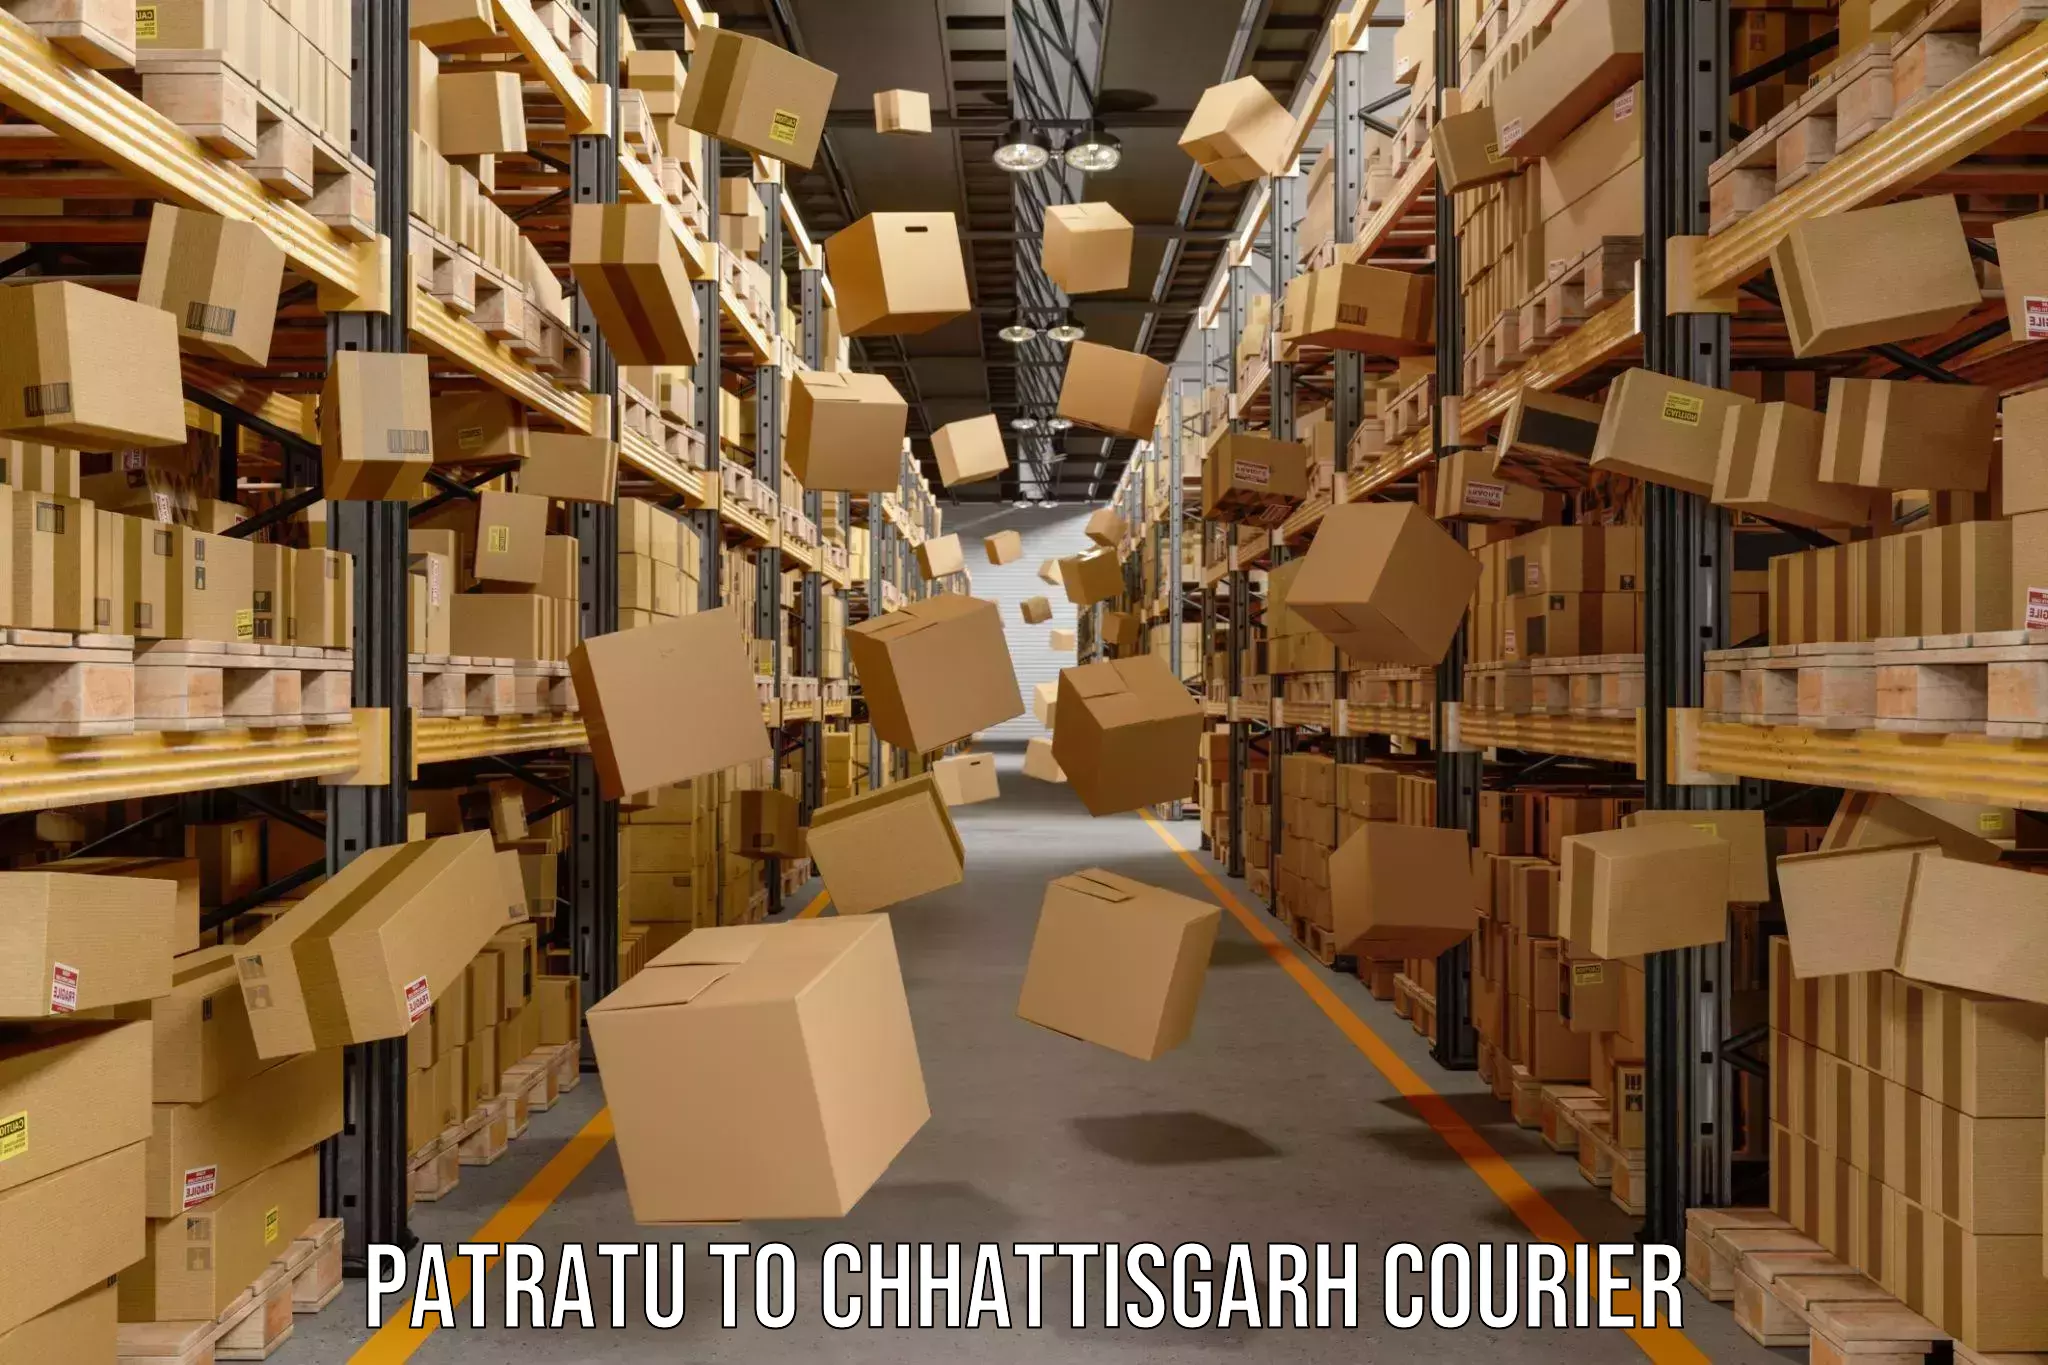 Multi-national courier services Patratu to Janjgir Champa